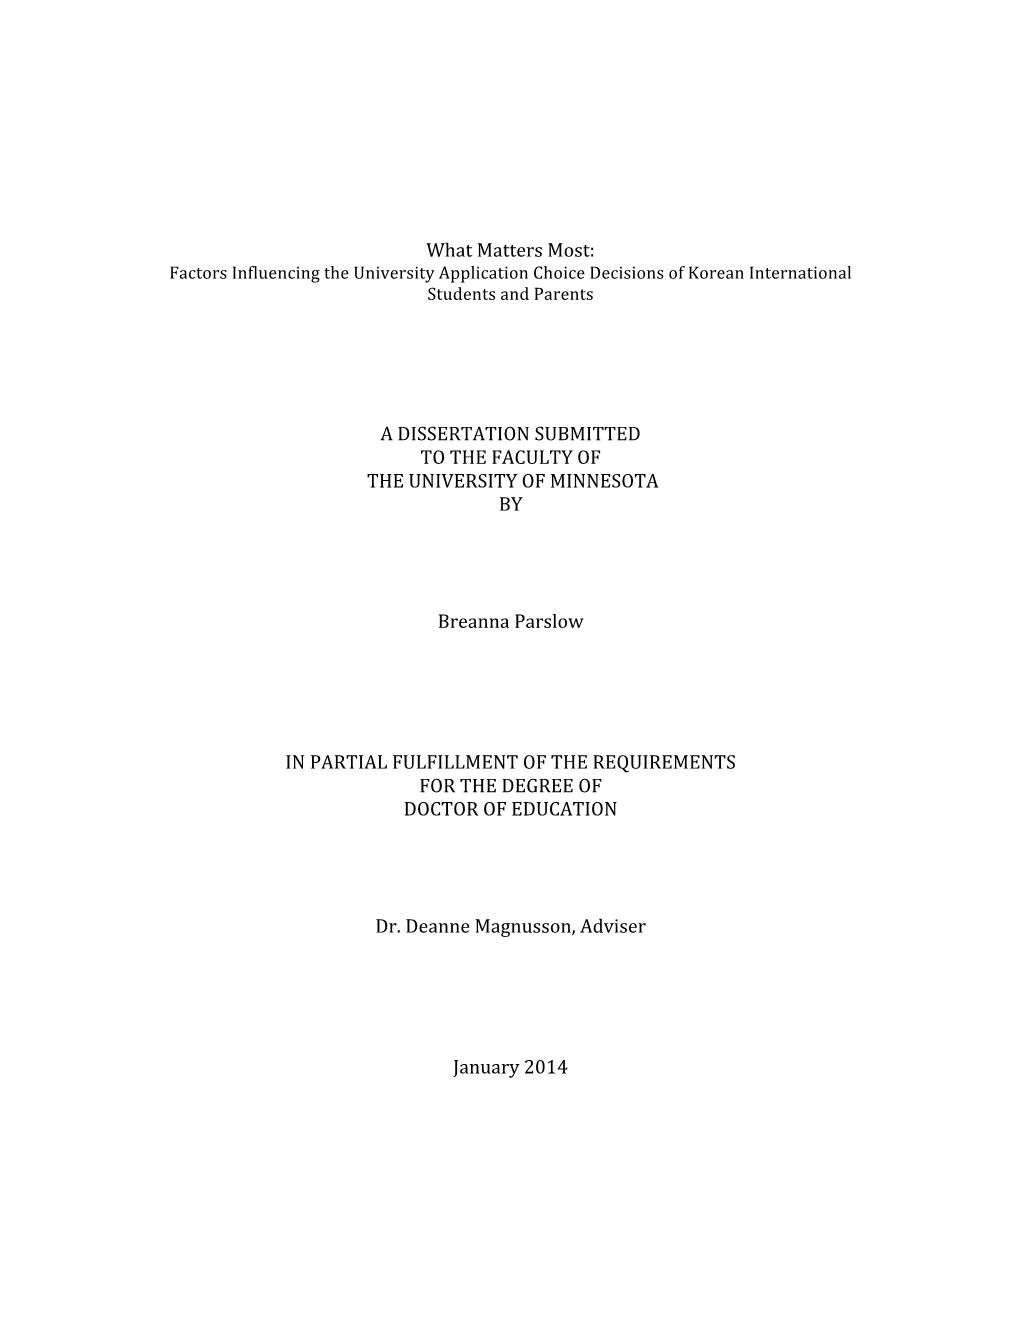 What Matters Most: a DISSERTATION SUBMITTED to the FACULTY OF